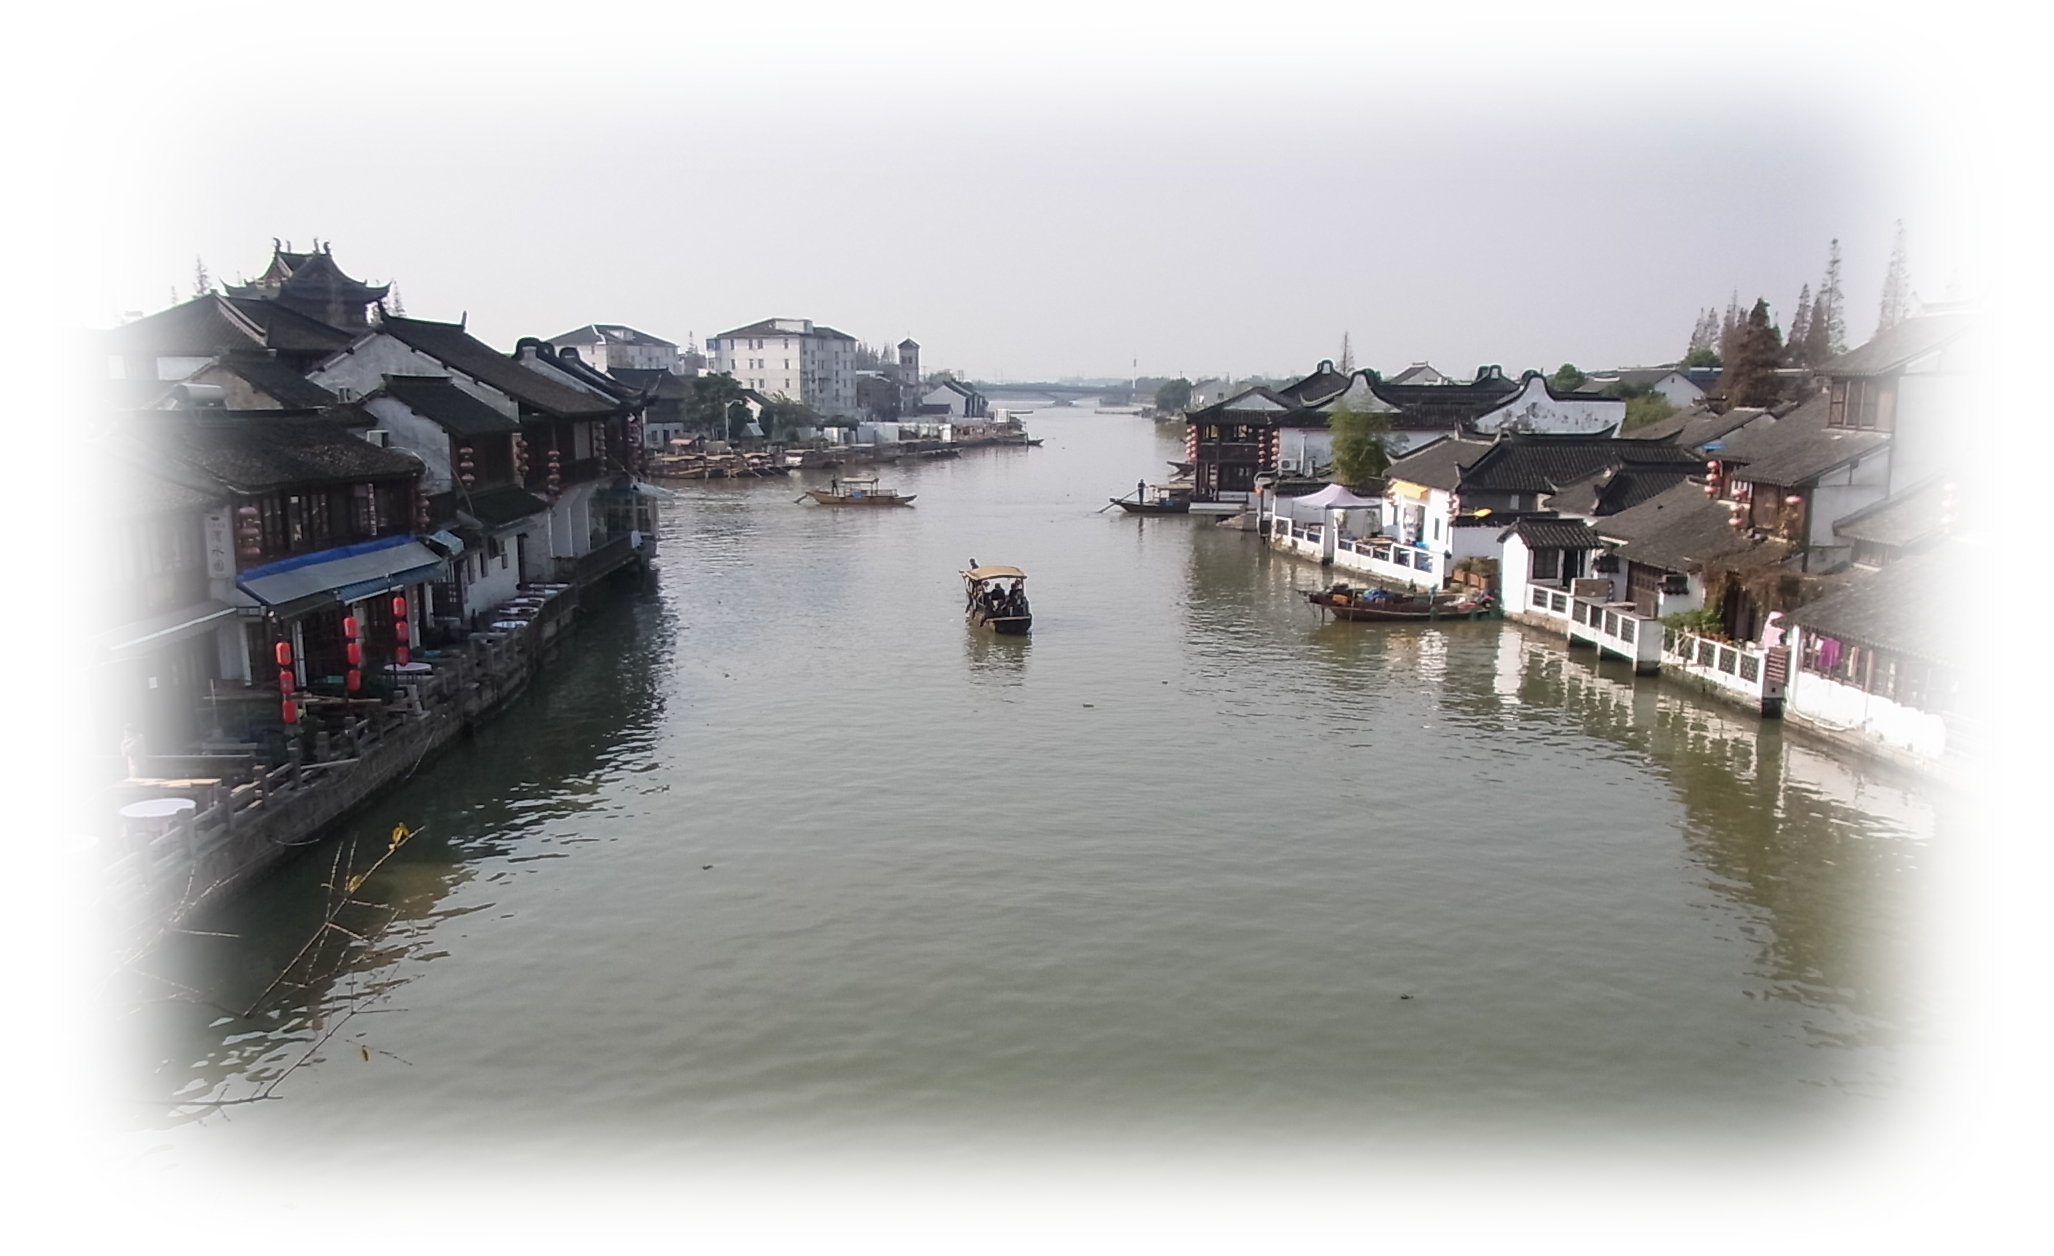 The Caogang River seen from the top of the Pengsheng Bridge